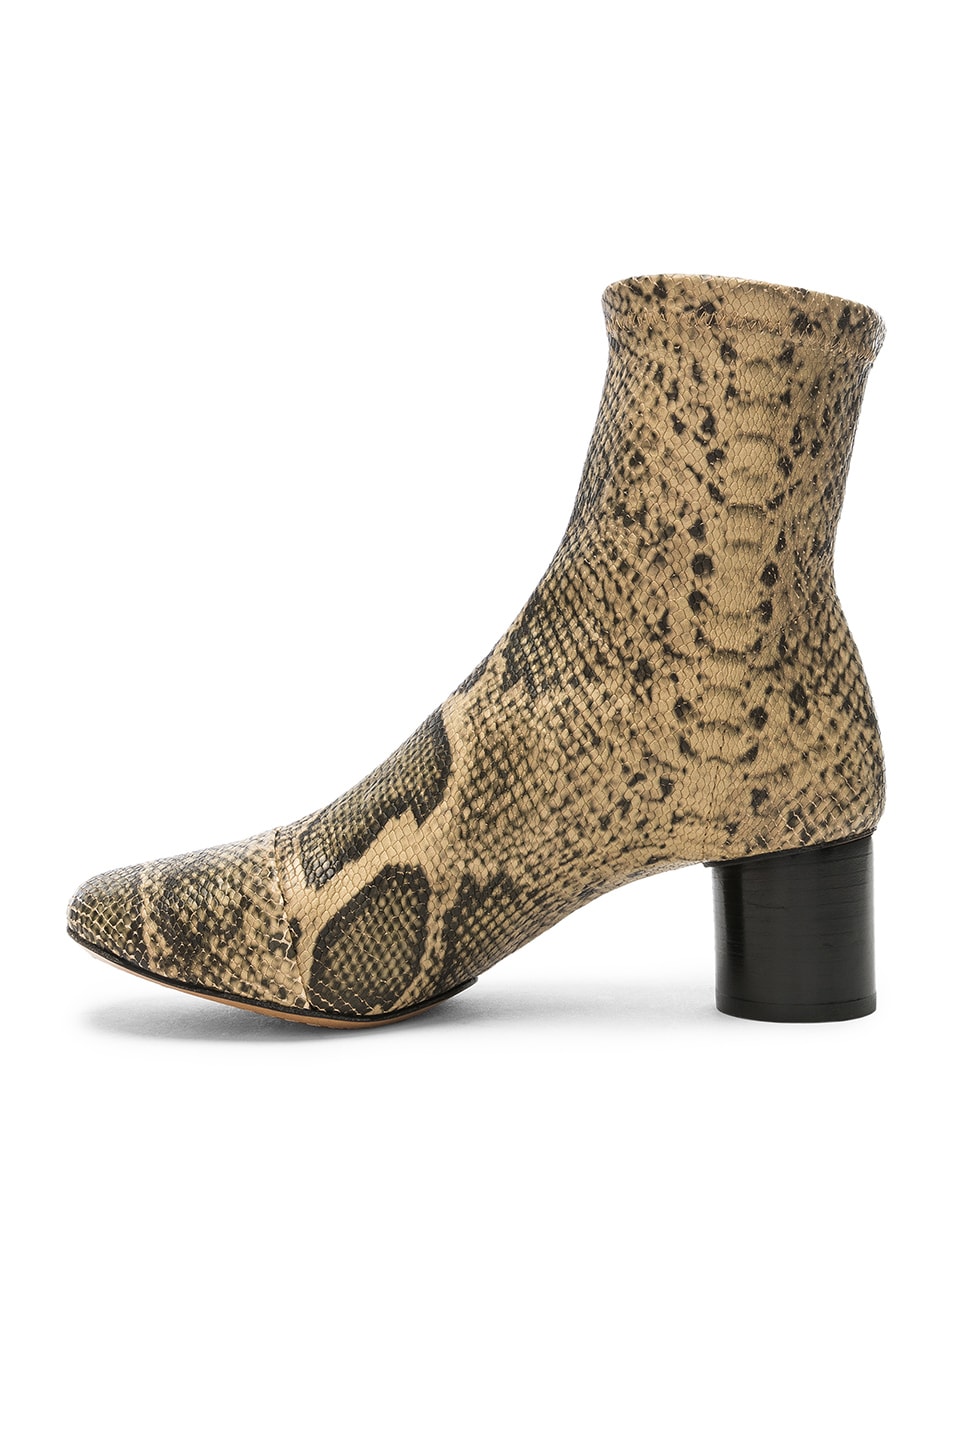 Isabel Marant Python Embossed Datsy Boots in Natural | FWRD